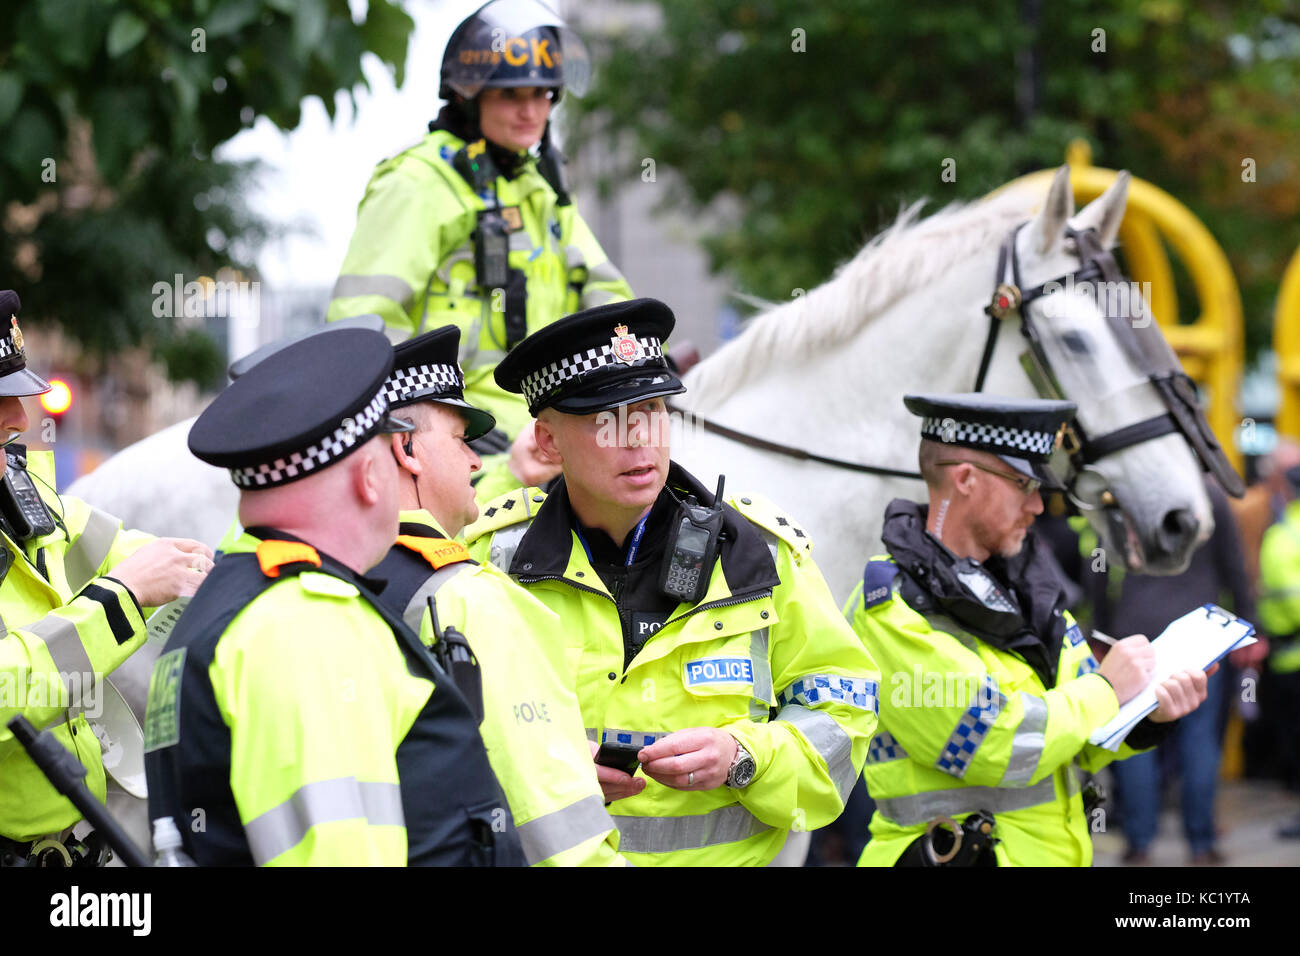 St Peters Square, Manchester, UK - Sunday 1st October 2017 - Senior Police officers discuss tactics whilst trying to contain a group of protesters outside the Conservative Party Conference. Photo Steven May / Alamy Live News Stock Photo